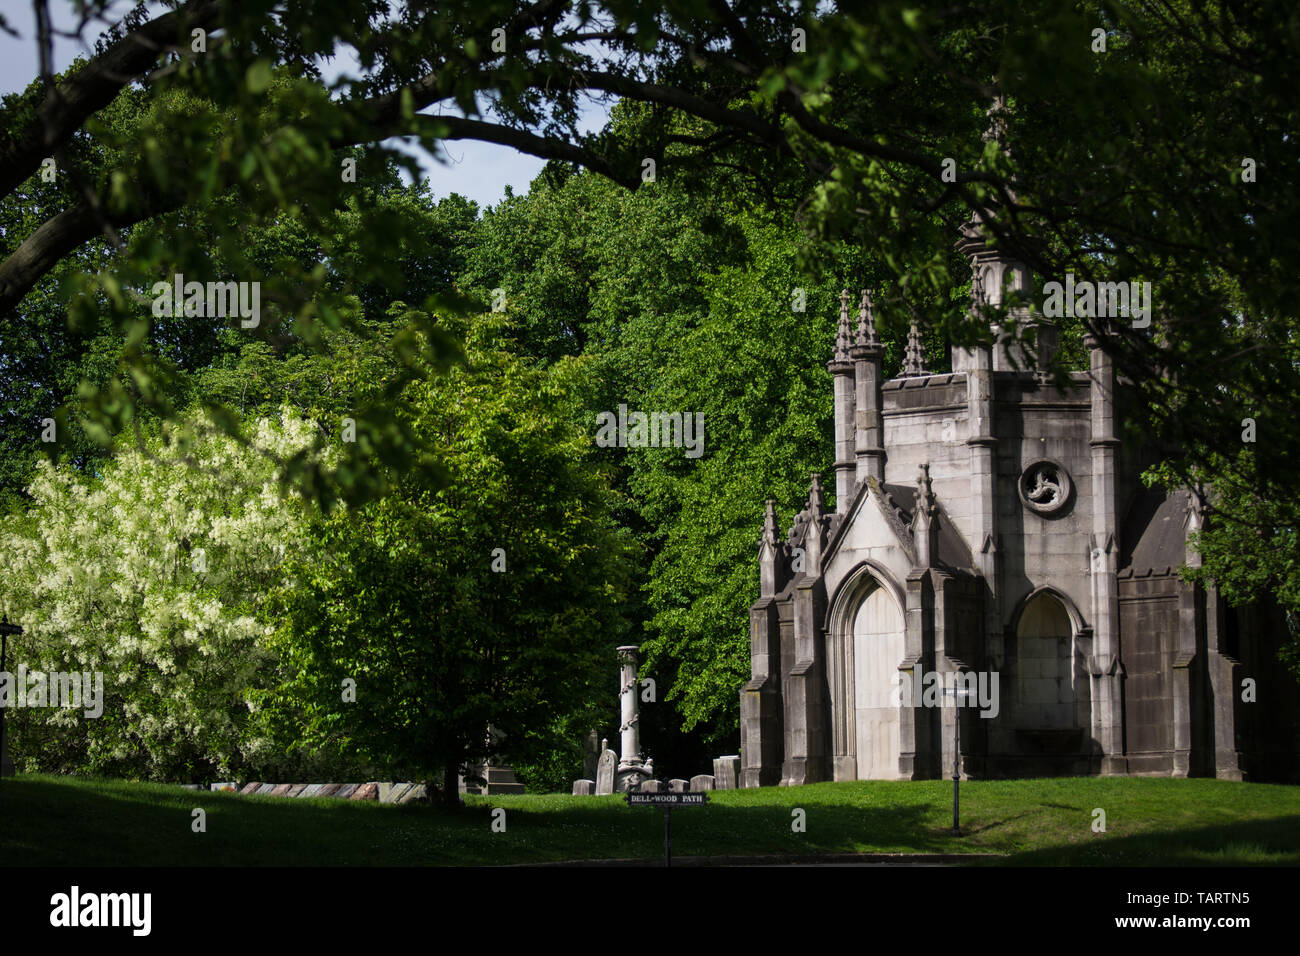 The historic Green-Wood Cemetery is located in the Park Slope neighborhood of Brooklyn, New York, USA.  The cemetery is a National Historic Landmark. Stock Photo